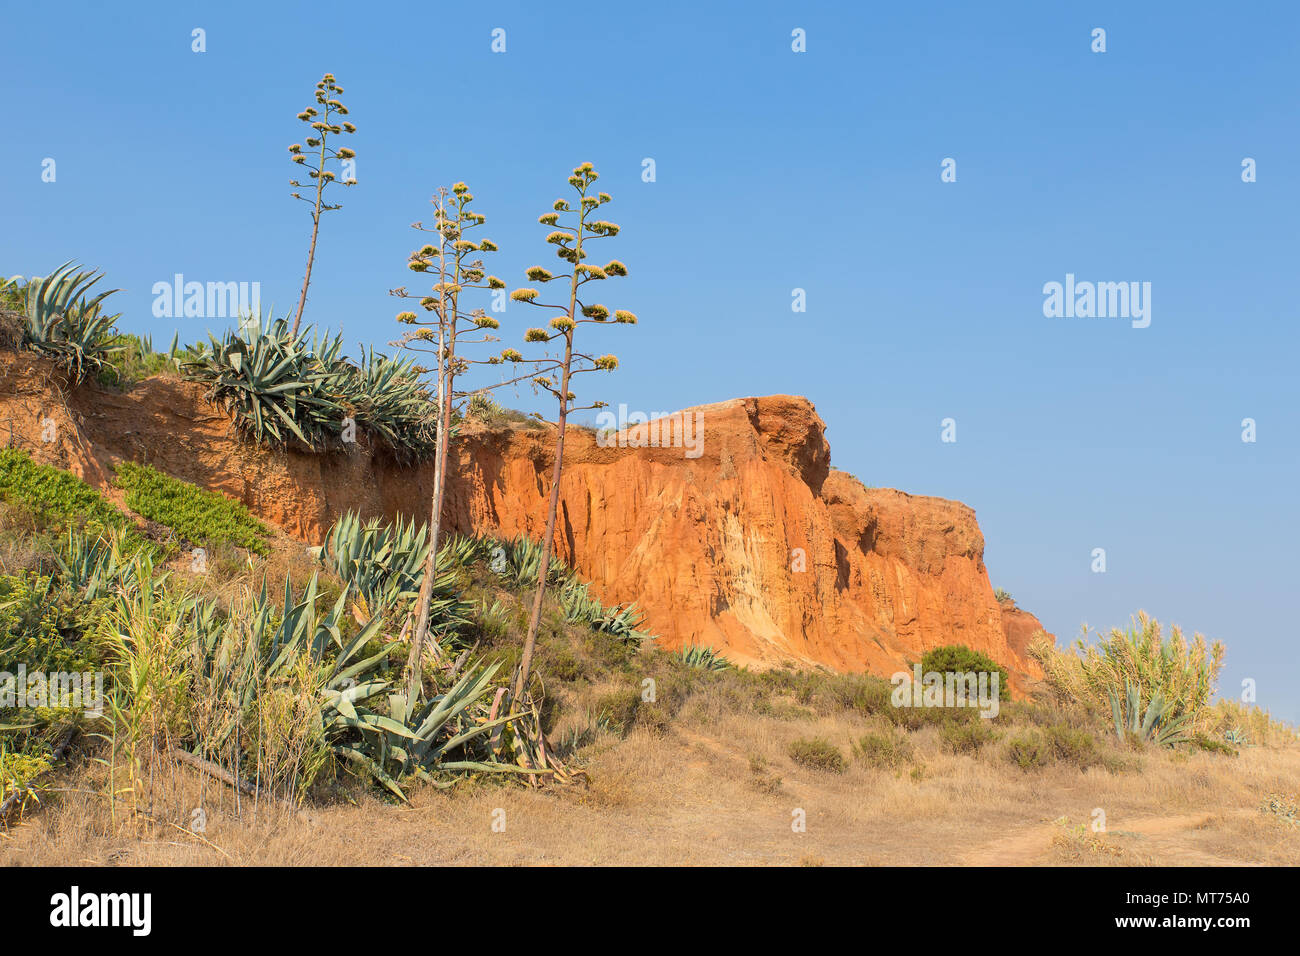 Landscape with Agaves at european rocky mountain Stock Photo